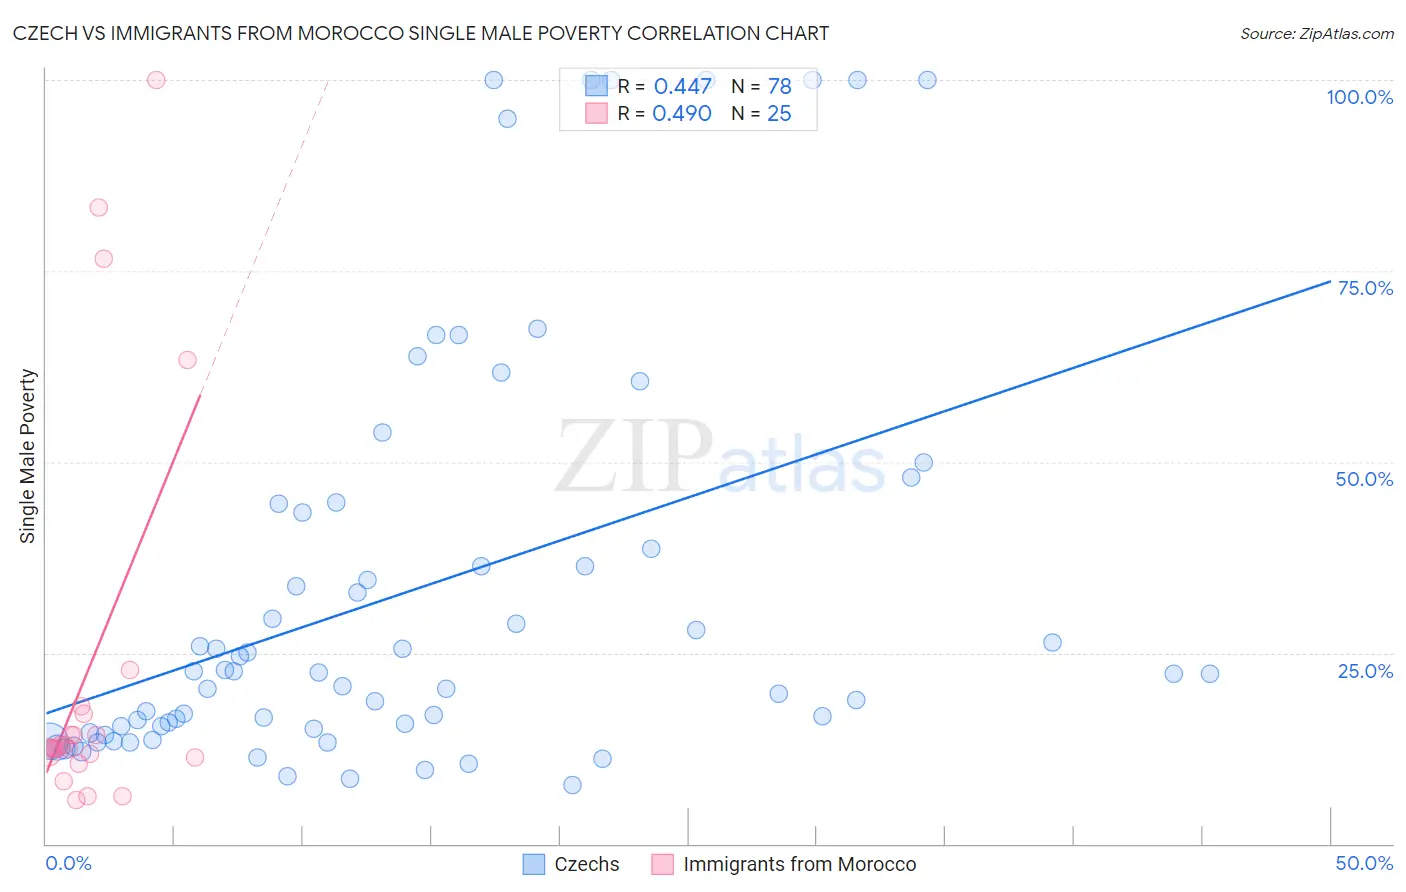 Czech vs Immigrants from Morocco Single Male Poverty